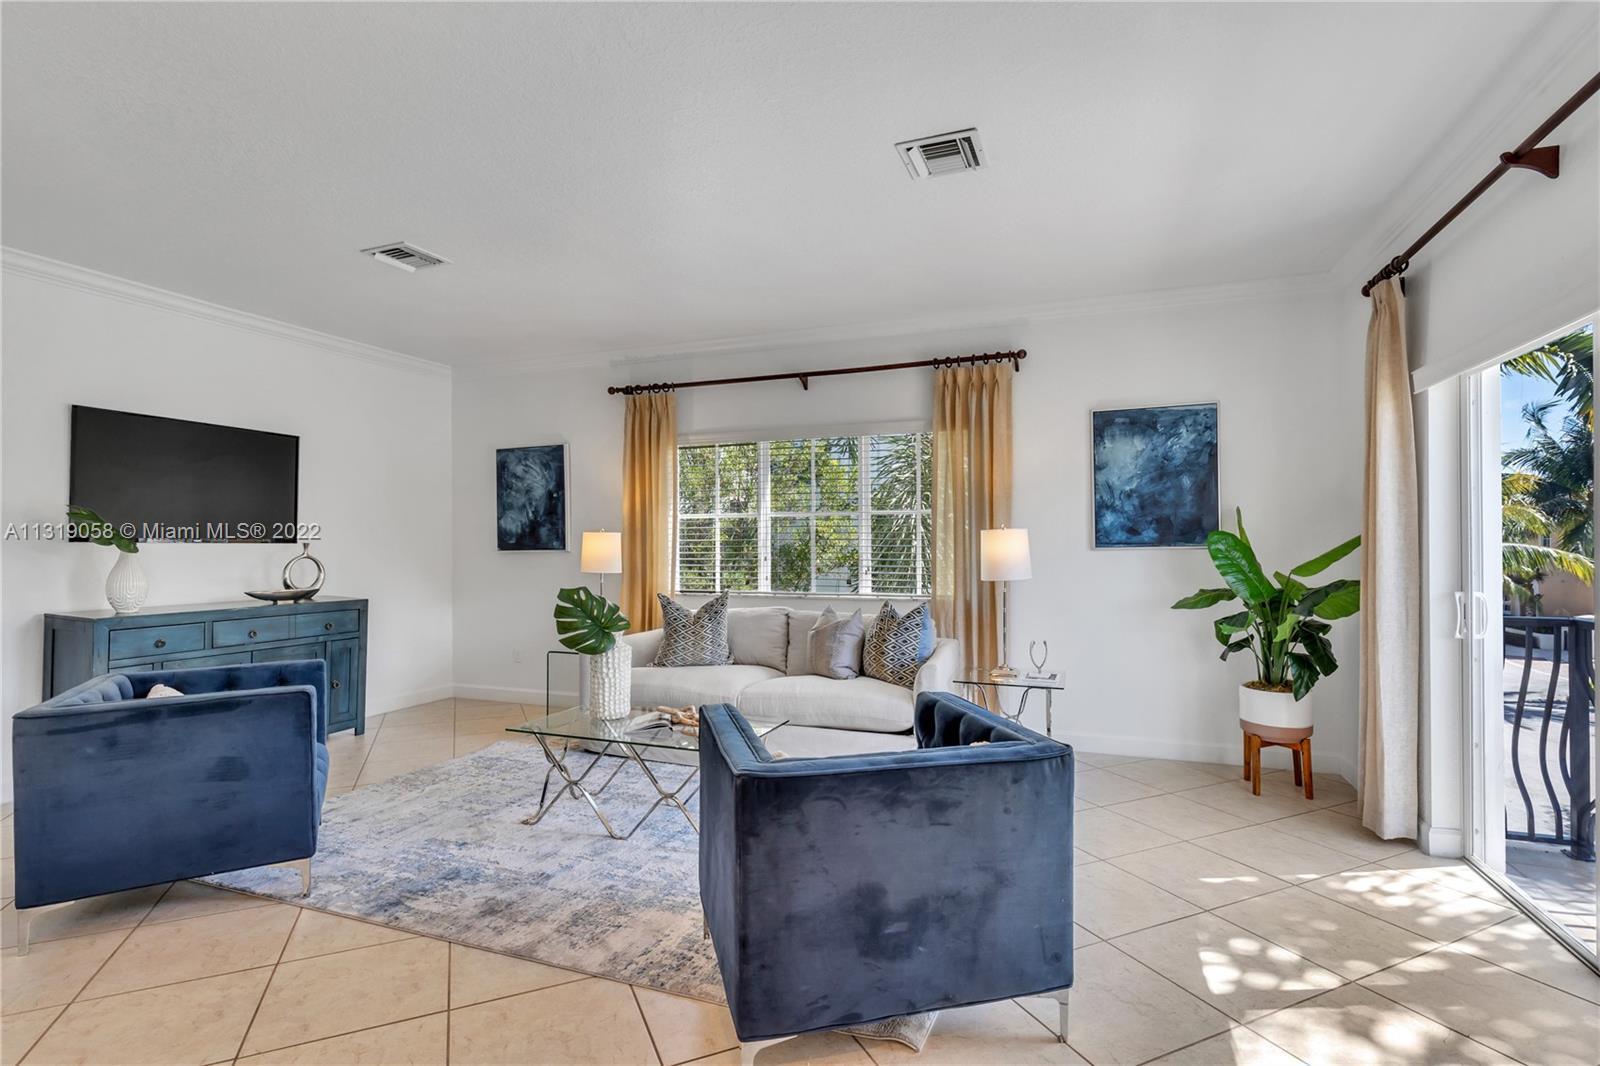 UNIQUE FREE STANDING TOWNHOME, LOCATED IN THE HEART OF BOCA RATON. MIZNER PARK , BEACHES AND FAU MIN